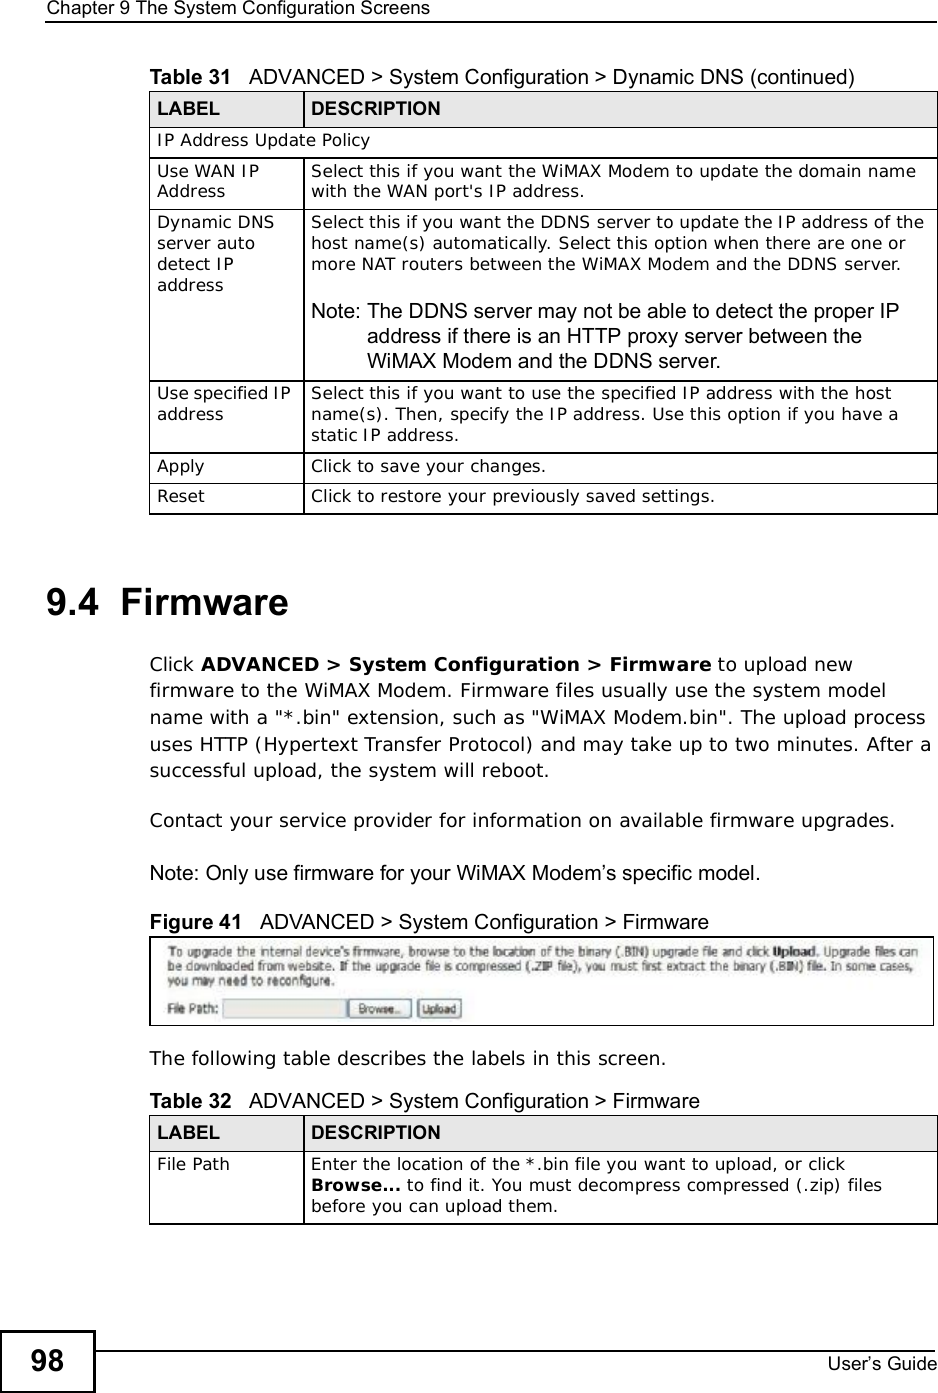 Chapter 9The System Configuration ScreensUser s Guide989.4  FirmwareClick ADVANCED &gt; System Configuration &gt; Firmware to upload new firmware to the WiMAX Modem. Firmware files usually use the system model name with a &quot;*.bin&quot; extension, such as &quot;WiMAX Modem.bin&quot;. The upload process uses HTTP (Hypertext Transfer Protocol) and may take up to two minutes. After a successful upload, the system will reboot. Contact your service provider for information on available firmware upgrades.Note: Only use firmware for your WiMAX Modem s specific model.Figure 41   ADVANCED &gt; System Configuration &gt; FirmwareThe following table describes the labels in this screen.IP Address Update PolicyUse WAN IP Address Select this if you want the WiMAX Modem to update the domain name with the WAN port&apos;s IP address.Dynamic DNS server auto detect IP addressSelect this if you want the DDNS server to update the IP address of the host name(s) automatically. Select this optionwhen there are one or more NAT routers between the WiMAX Modem and the DDNS server.Note: The DDNS server may not be able to detect the proper IP address if there is an HTTP proxy server between the WiMAX Modem and the DDNS server.Use specified IP address Select this if you want to use the specified IP address with the host name(s). Then, specify the IP address. Use this option if you have a static IP address.ApplyClick to save your changes.ResetClick to restore your previously saved settings.Table 31   ADVANCED &gt; System Configuration &gt; Dynamic DNS (continued)LABEL DESCRIPTIONTable 32   ADVANCED &gt; System Configuration &gt; FirmwareLABEL DESCRIPTIONFile Path Enter the location of the *.bin file you want to upload, or click Browse... to find it. You must decompress compressed (.zip) files before you can upload them.